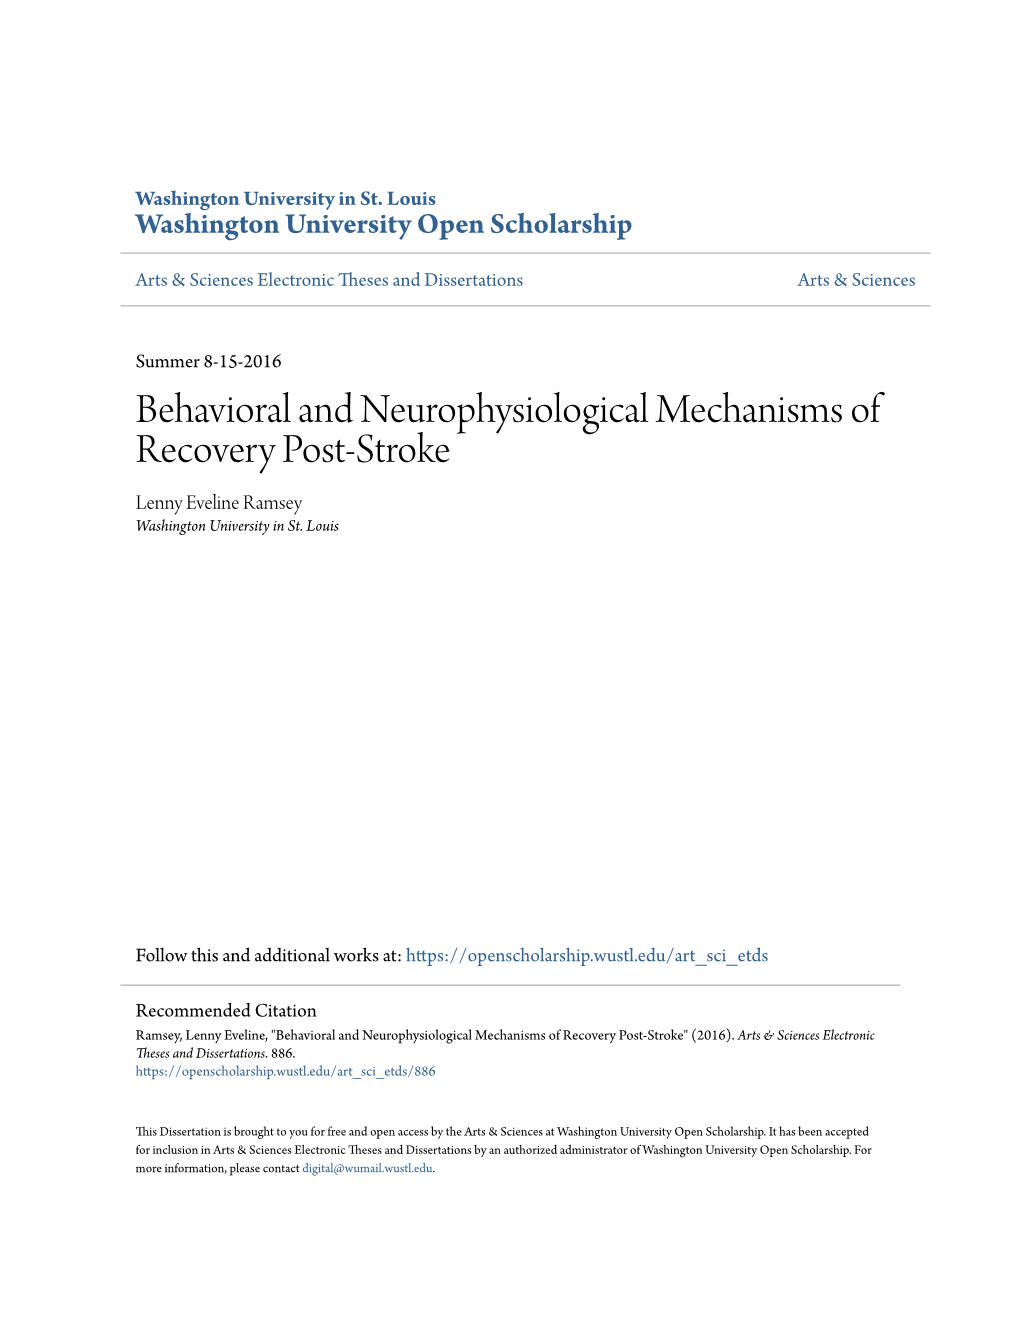 Behavioral and Neurophysiological Mechanisms of Recovery Post-Stroke Lenny Eveline Ramsey Washington University in St